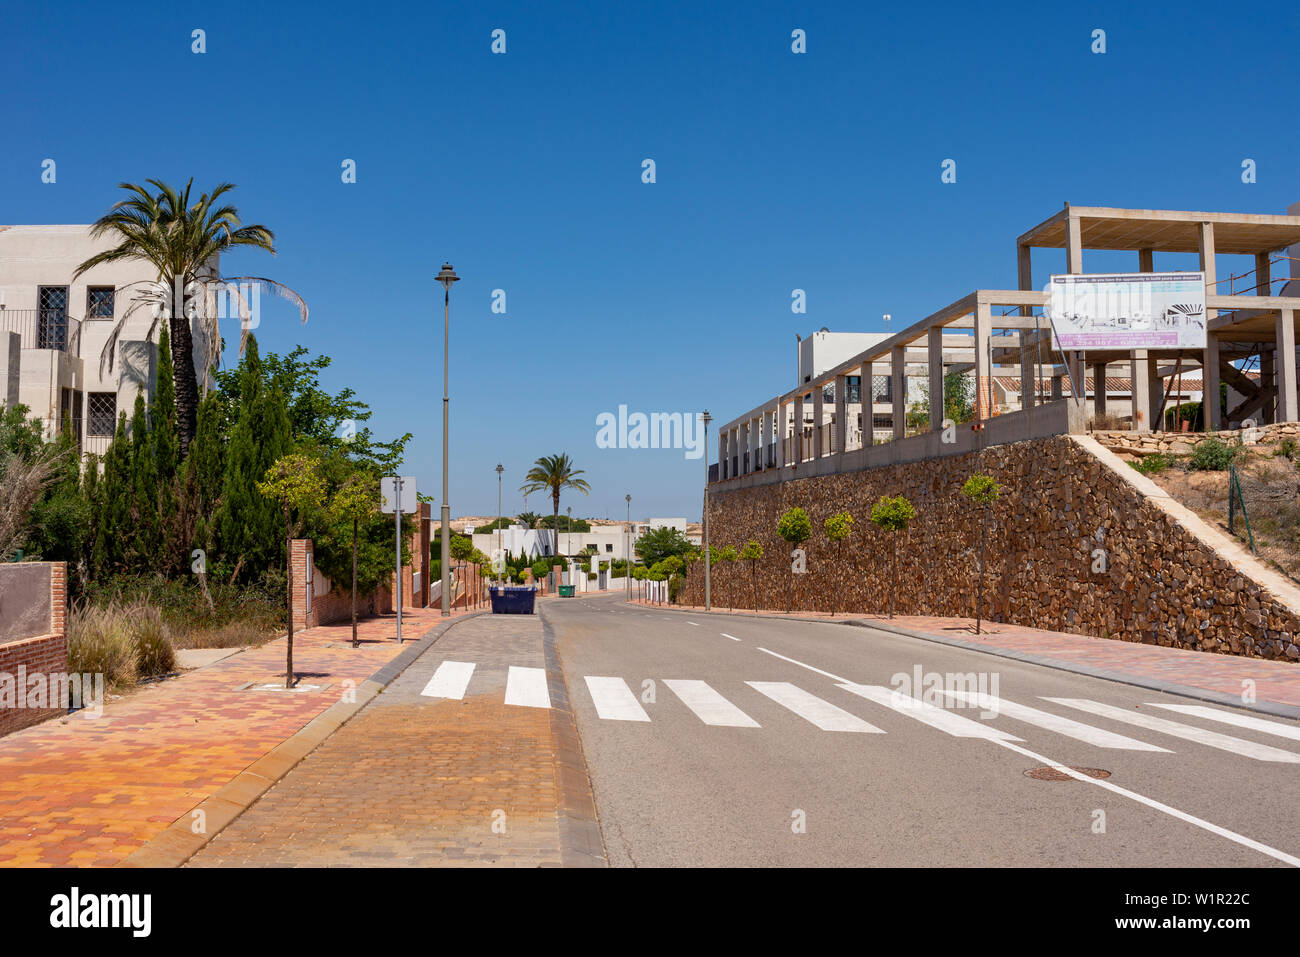 Peraleja Golf course and properties in Sucina, Murcia, Spain, Europe. Course has closed and fallen into disrepair. Frame of unfinished building Stock Photo